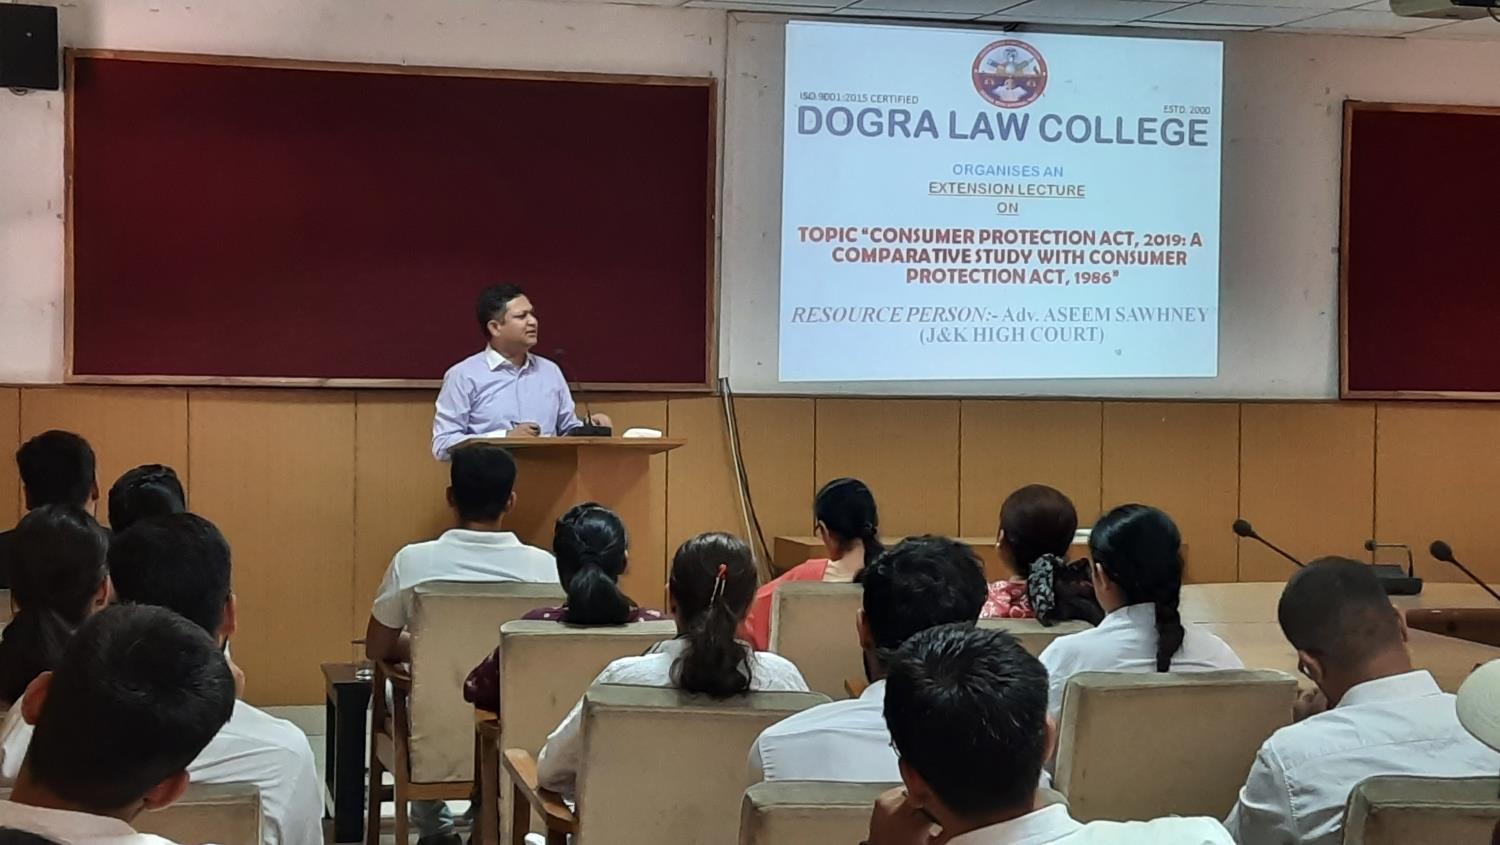 DLC organized Extension Lecture on the topic "Consumer Protection Act 2019: A Comparative Study with Consumer Protection Act1986" by Adv. Aseem Sewhney (J&K High Court)"